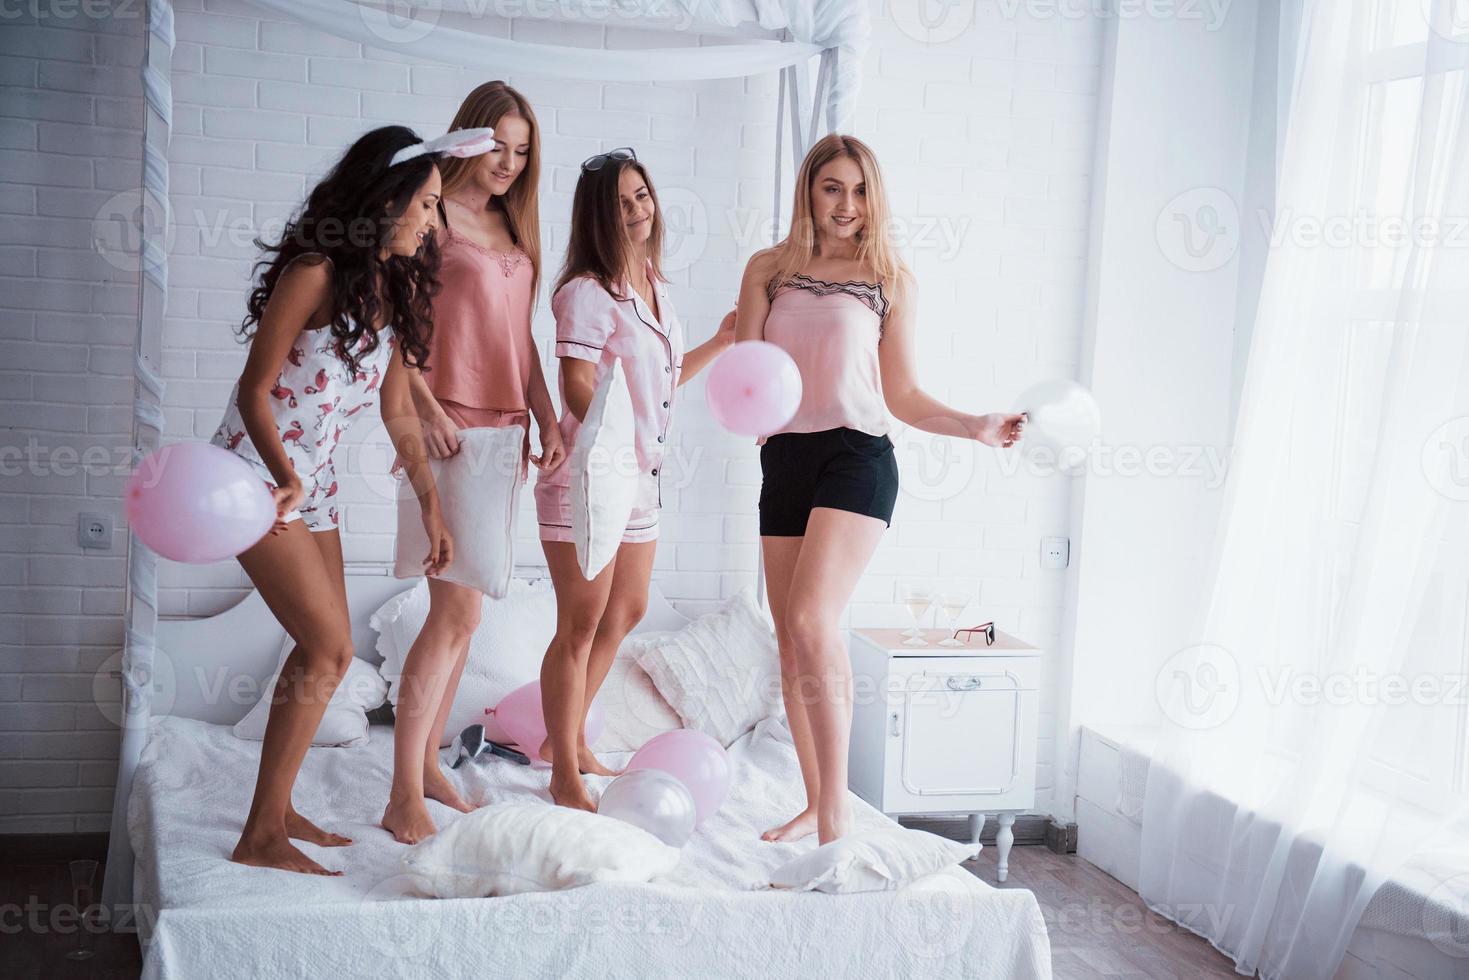 Standing on the luxury white bad at holiday time with balloons and bunny ears. Four beautiful girls in night wear have party photo